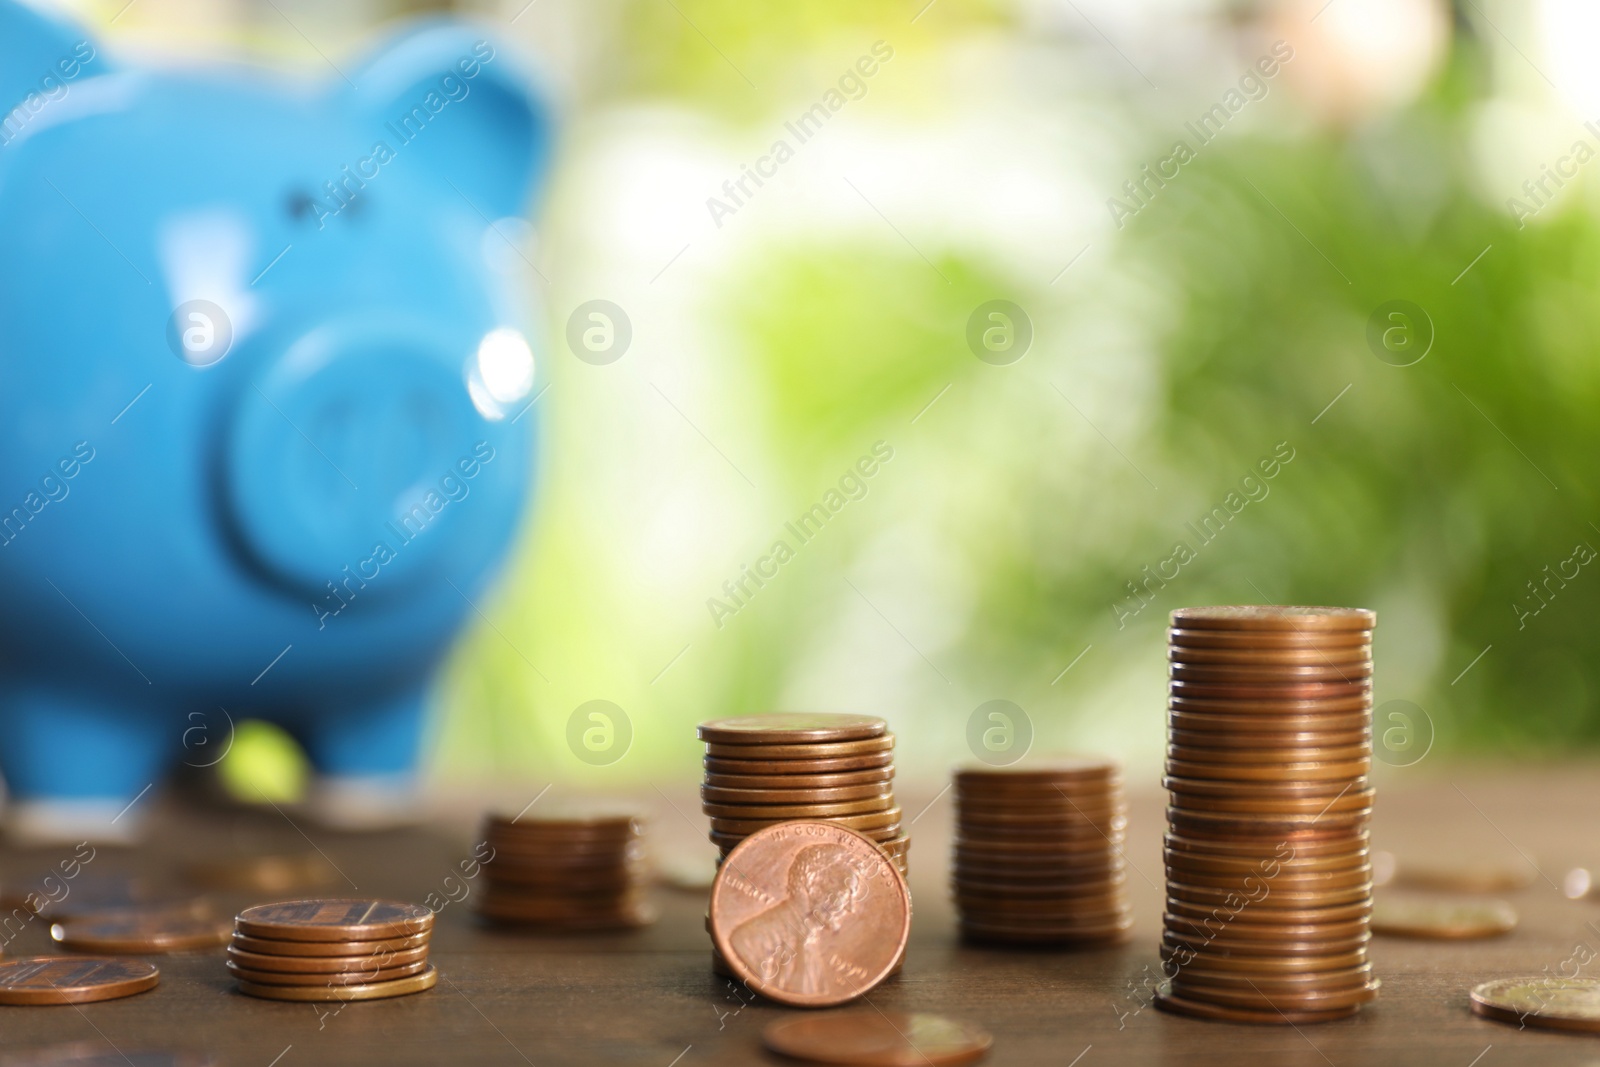 Photo of Many metal coins and piggy bank on wooden table against blurred green background. Space for text